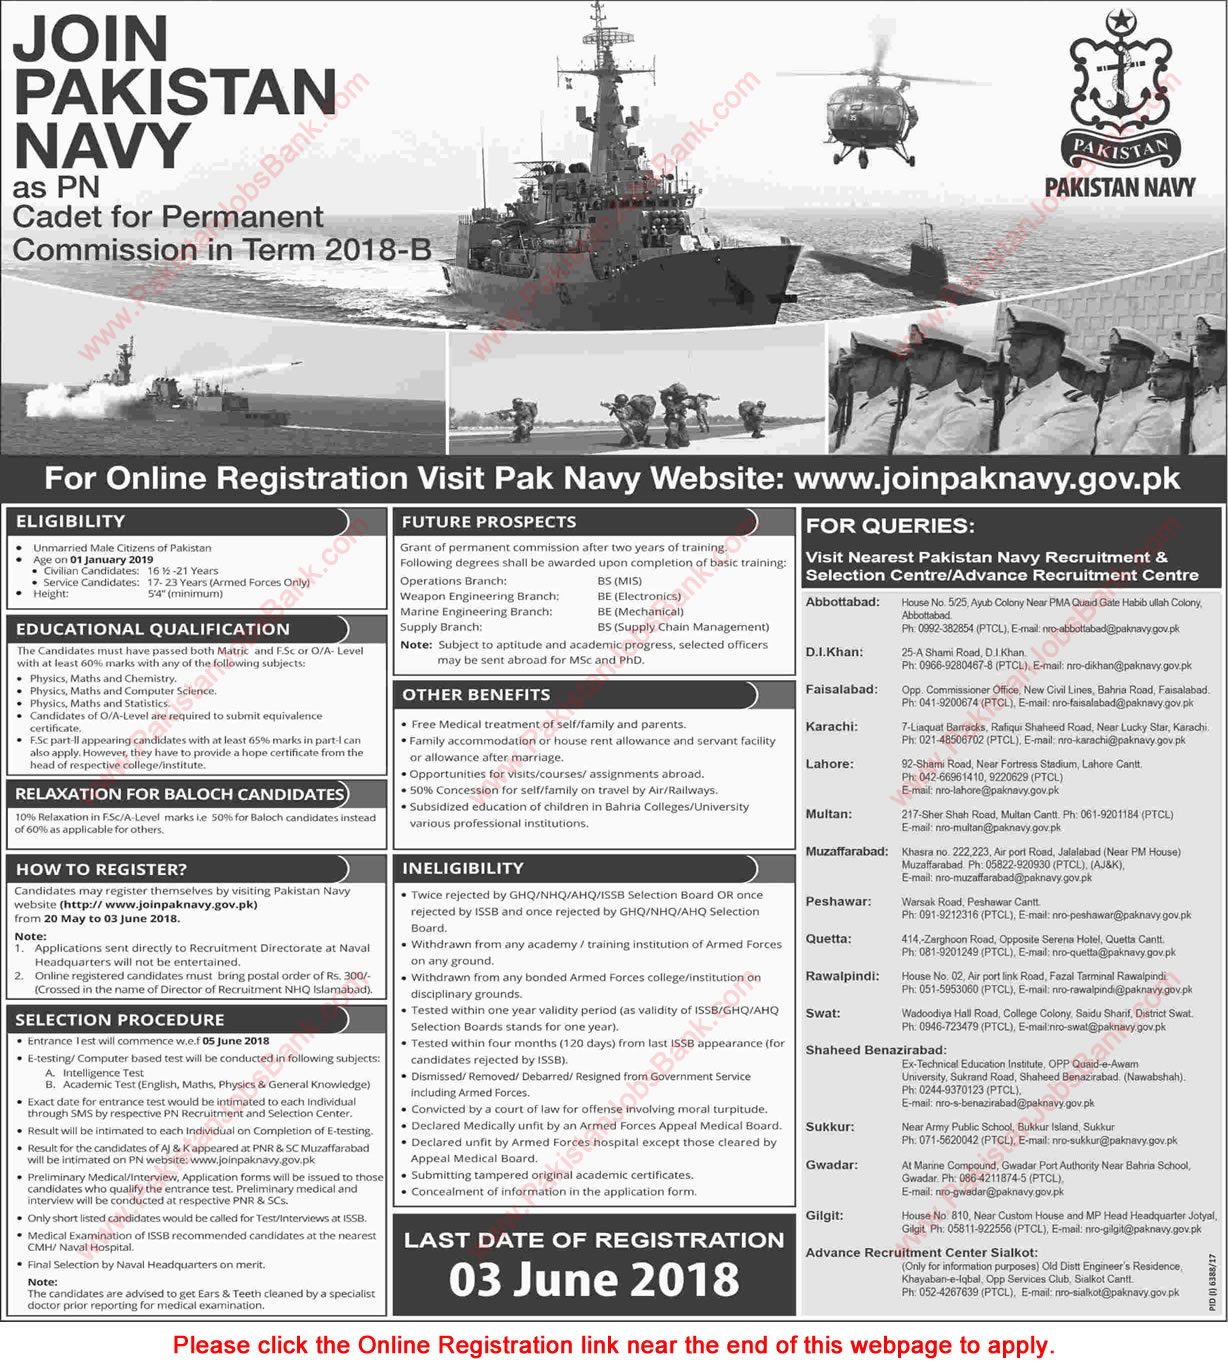 Join Pakistan Navy as PN Cadet 2018 May Online Registration for Permanent Commission in Term 2018-B Latest